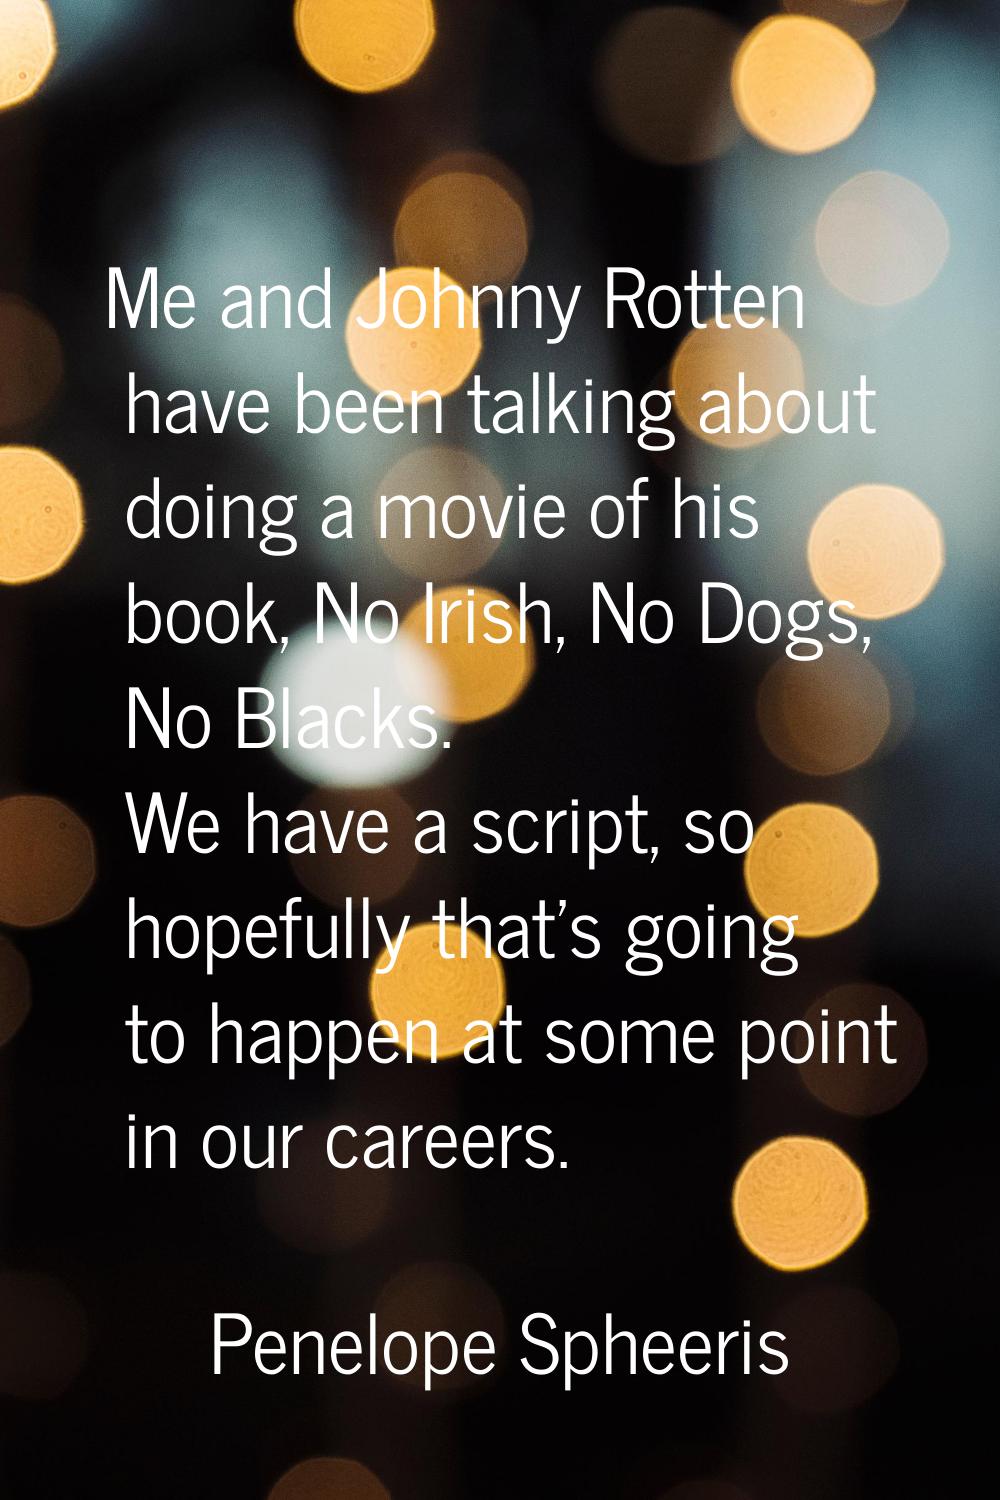 Me and Johnny Rotten have been talking about doing a movie of his book, No Irish, No Dogs, No Black